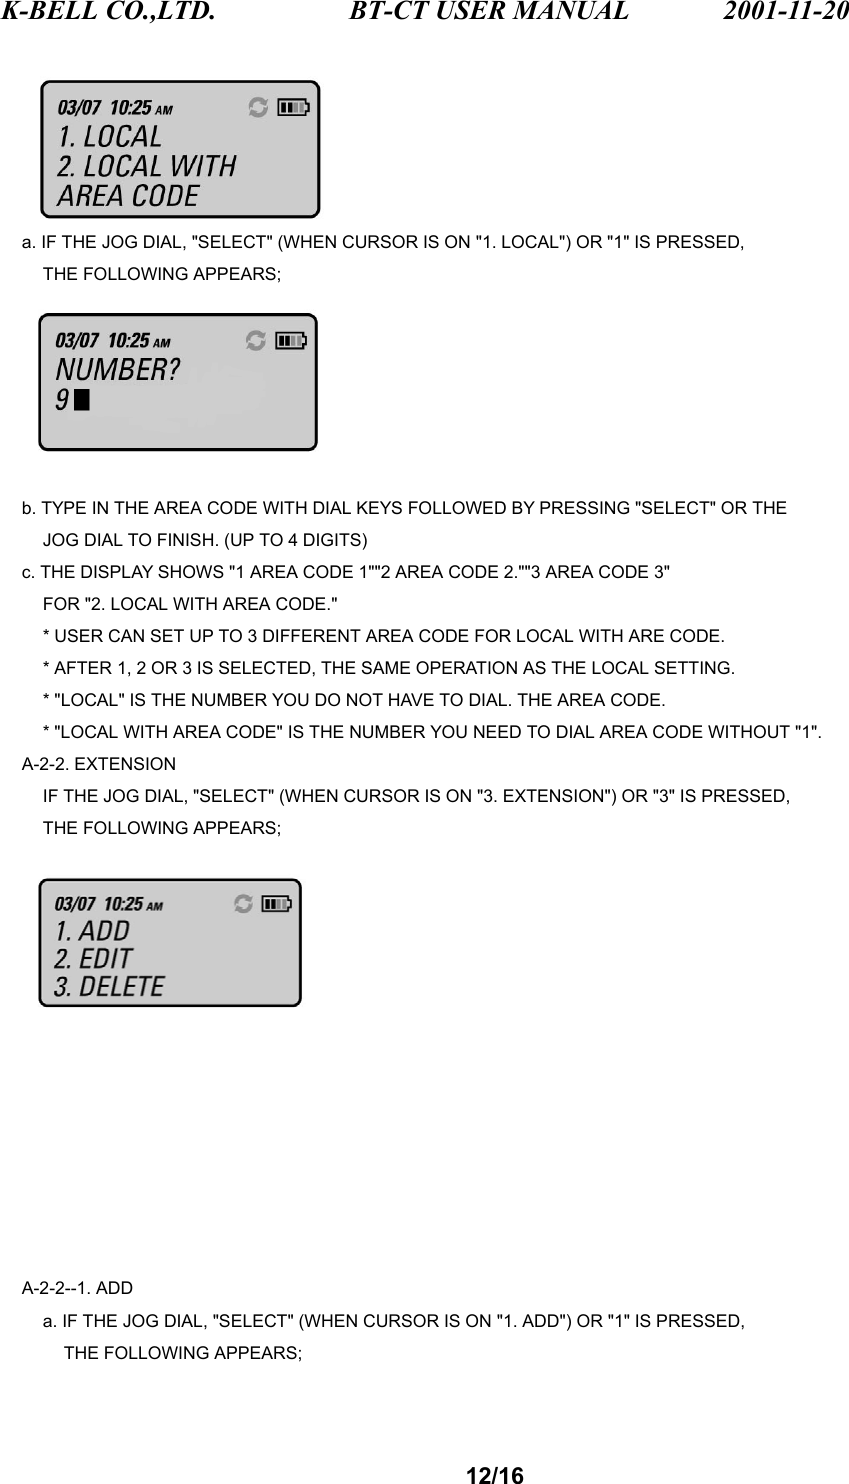 K-BELL CO.,LTD.                 BT-CT USER MANUAL            2001-11-20 12/16      a. IF THE JOG DIAL, &quot;SELECT&quot; (WHEN CURSOR IS ON &quot;1. LOCAL&quot;) OR &quot;1&quot; IS PRESSED,     THE FOLLOWING APPEARS;      b. TYPE IN THE AREA CODE WITH DIAL KEYS FOLLOWED BY PRESSING &quot;SELECT&quot; OR THE         JOG DIAL TO FINISH. (UP TO 4 DIGITS)     c. THE DISPLAY SHOWS &quot;1 AREA CODE 1&quot;&quot;2 AREA CODE 2.&quot;&quot;3 AREA CODE 3&quot;         FOR &quot;2. LOCAL WITH AREA CODE.&quot;         * USER CAN SET UP TO 3 DIFFERENT AREA CODE FOR LOCAL WITH ARE CODE.         * AFTER 1, 2 OR 3 IS SELECTED, THE SAME OPERATION AS THE LOCAL SETTING.         * &quot;LOCAL&quot; IS THE NUMBER YOU DO NOT HAVE TO DIAL. THE AREA CODE.         * &quot;LOCAL WITH AREA CODE&quot; IS THE NUMBER YOU NEED TO DIAL AREA CODE WITHOUT &quot;1&quot;.   A-2-2. EXTENSION         IF THE JOG DIAL, &quot;SELECT&quot; (WHEN CURSOR IS ON &quot;3. EXTENSION&quot;) OR &quot;3&quot; IS PRESSED,     THE FOLLOWING APPEARS;            A-2-2--1. ADD         a. IF THE JOG DIAL, &quot;SELECT&quot; (WHEN CURSOR IS ON &quot;1. ADD&quot;) OR &quot;1&quot; IS PRESSED,       THE FOLLOWING APPEARS; 